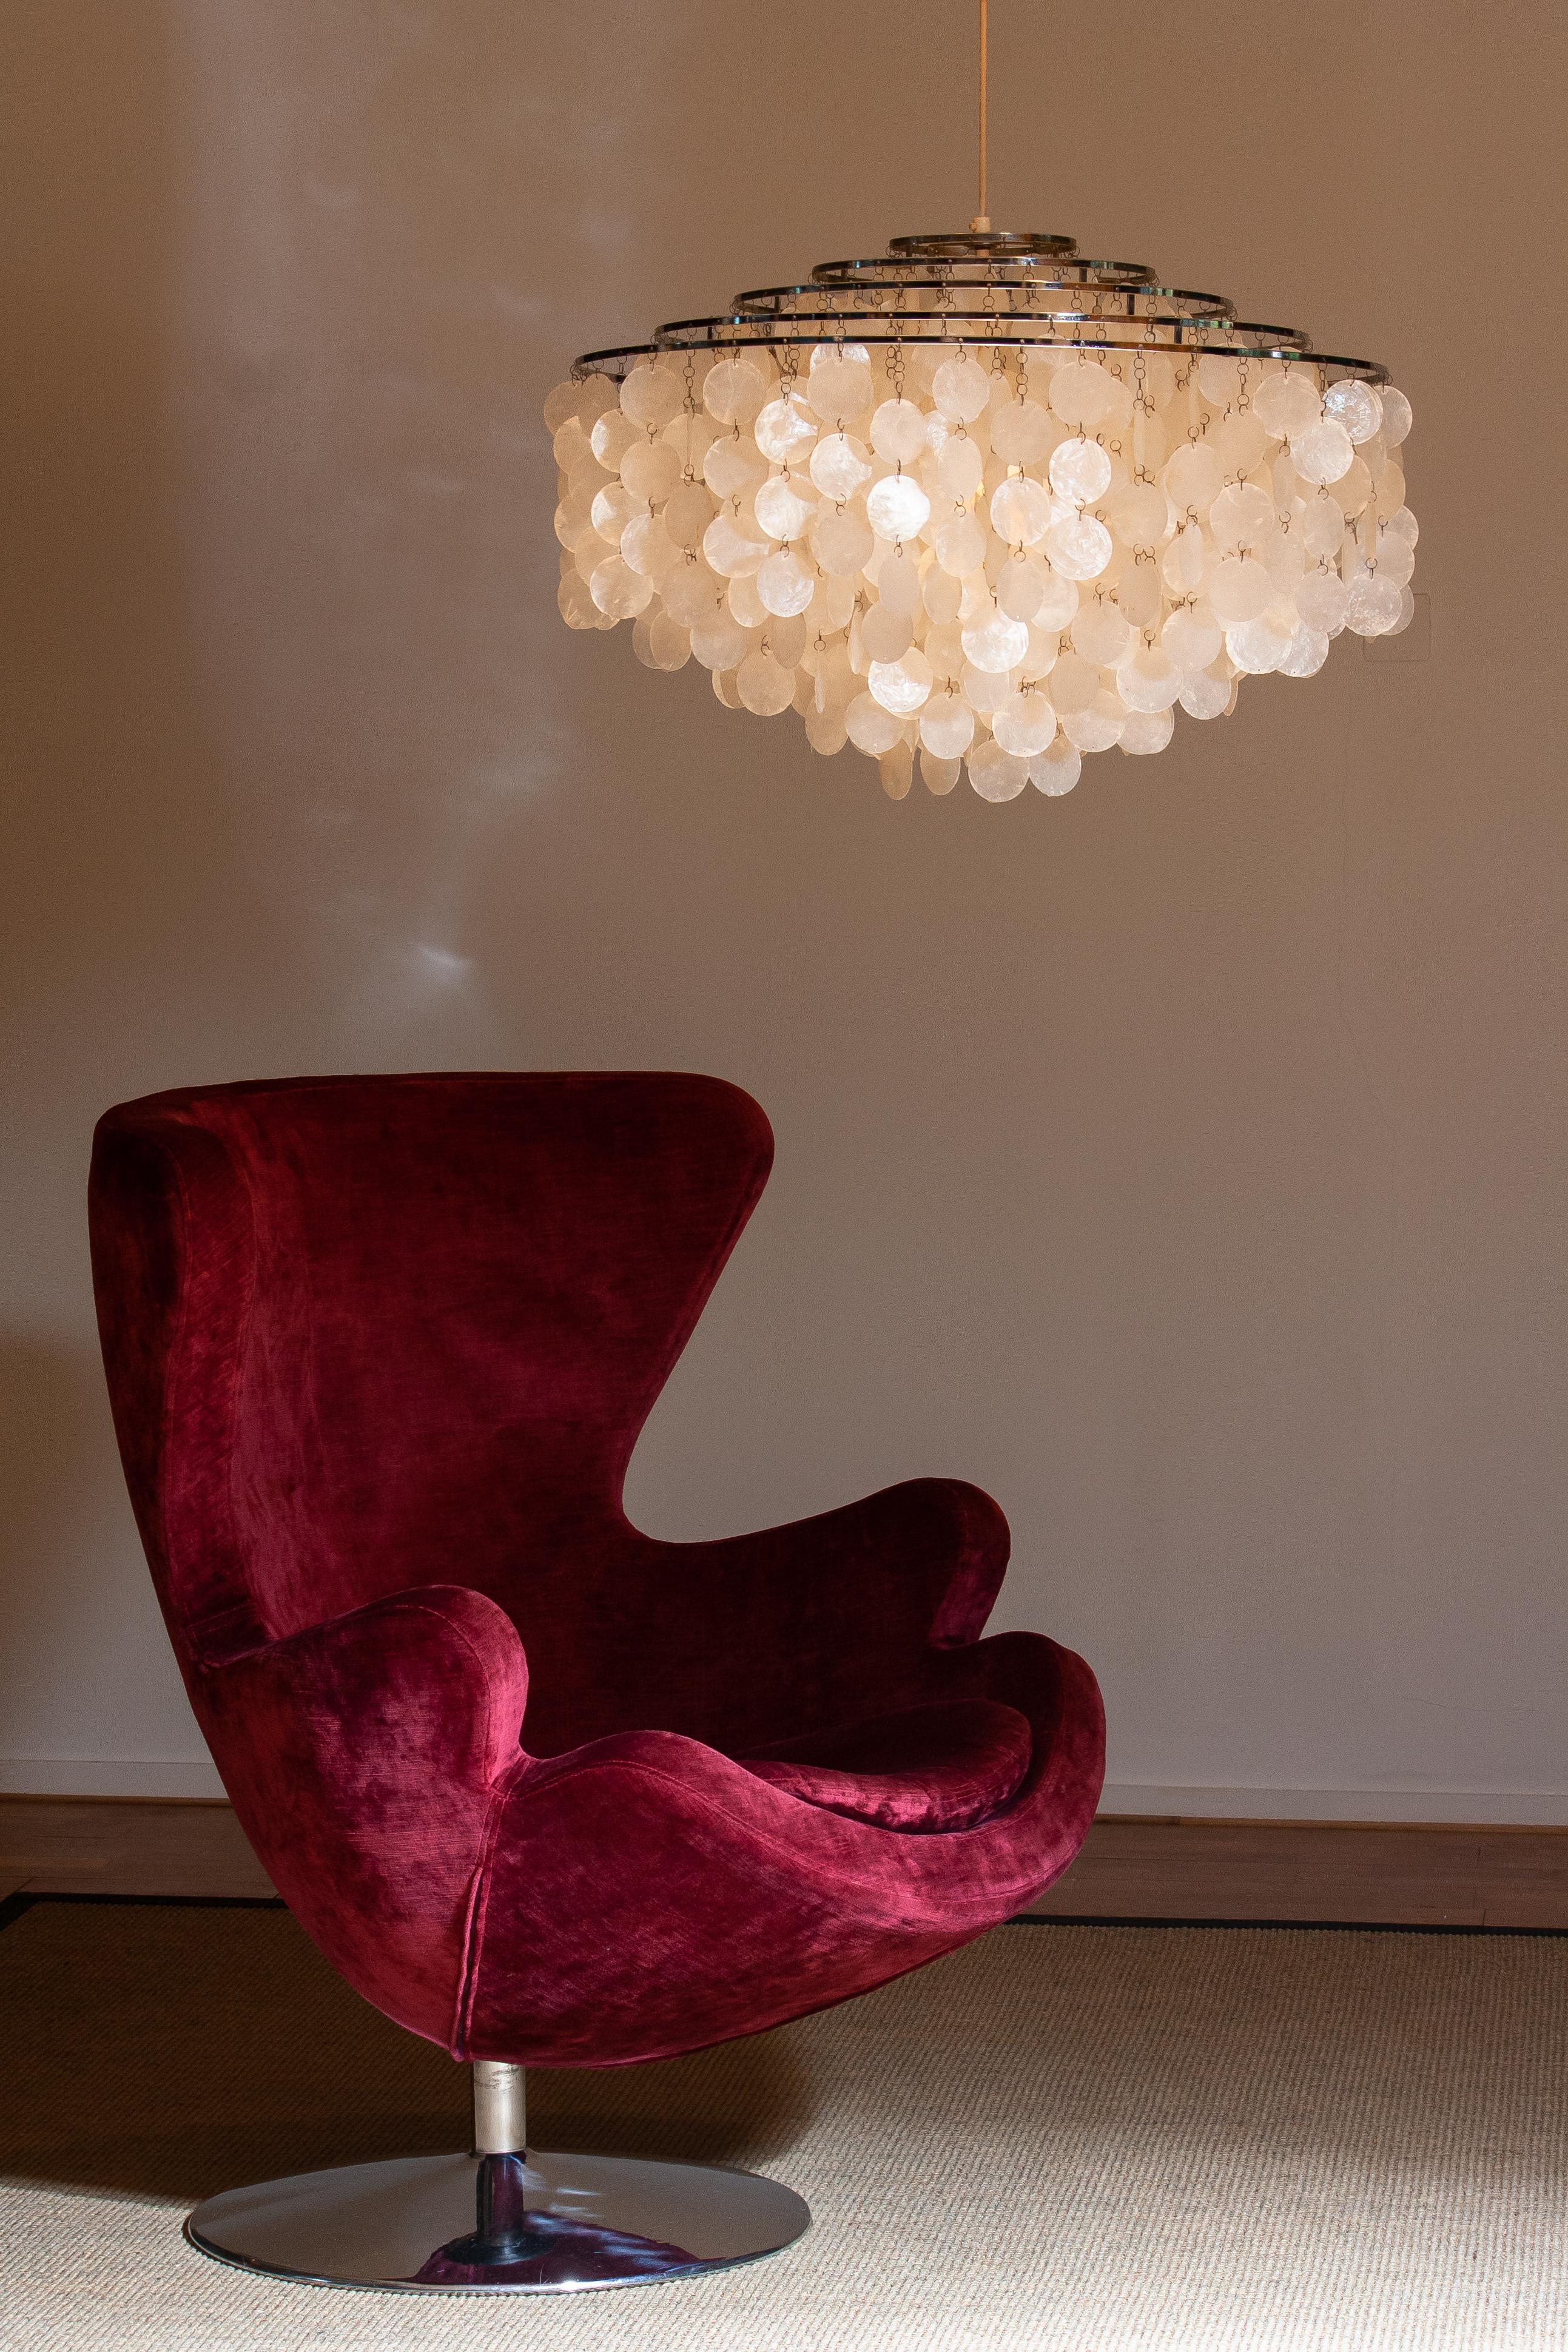 1960s Extra Large Capiz Shell Chandelier by Verner Panton for Luber AG. Swiss In Good Condition In Silvolde, Gelderland